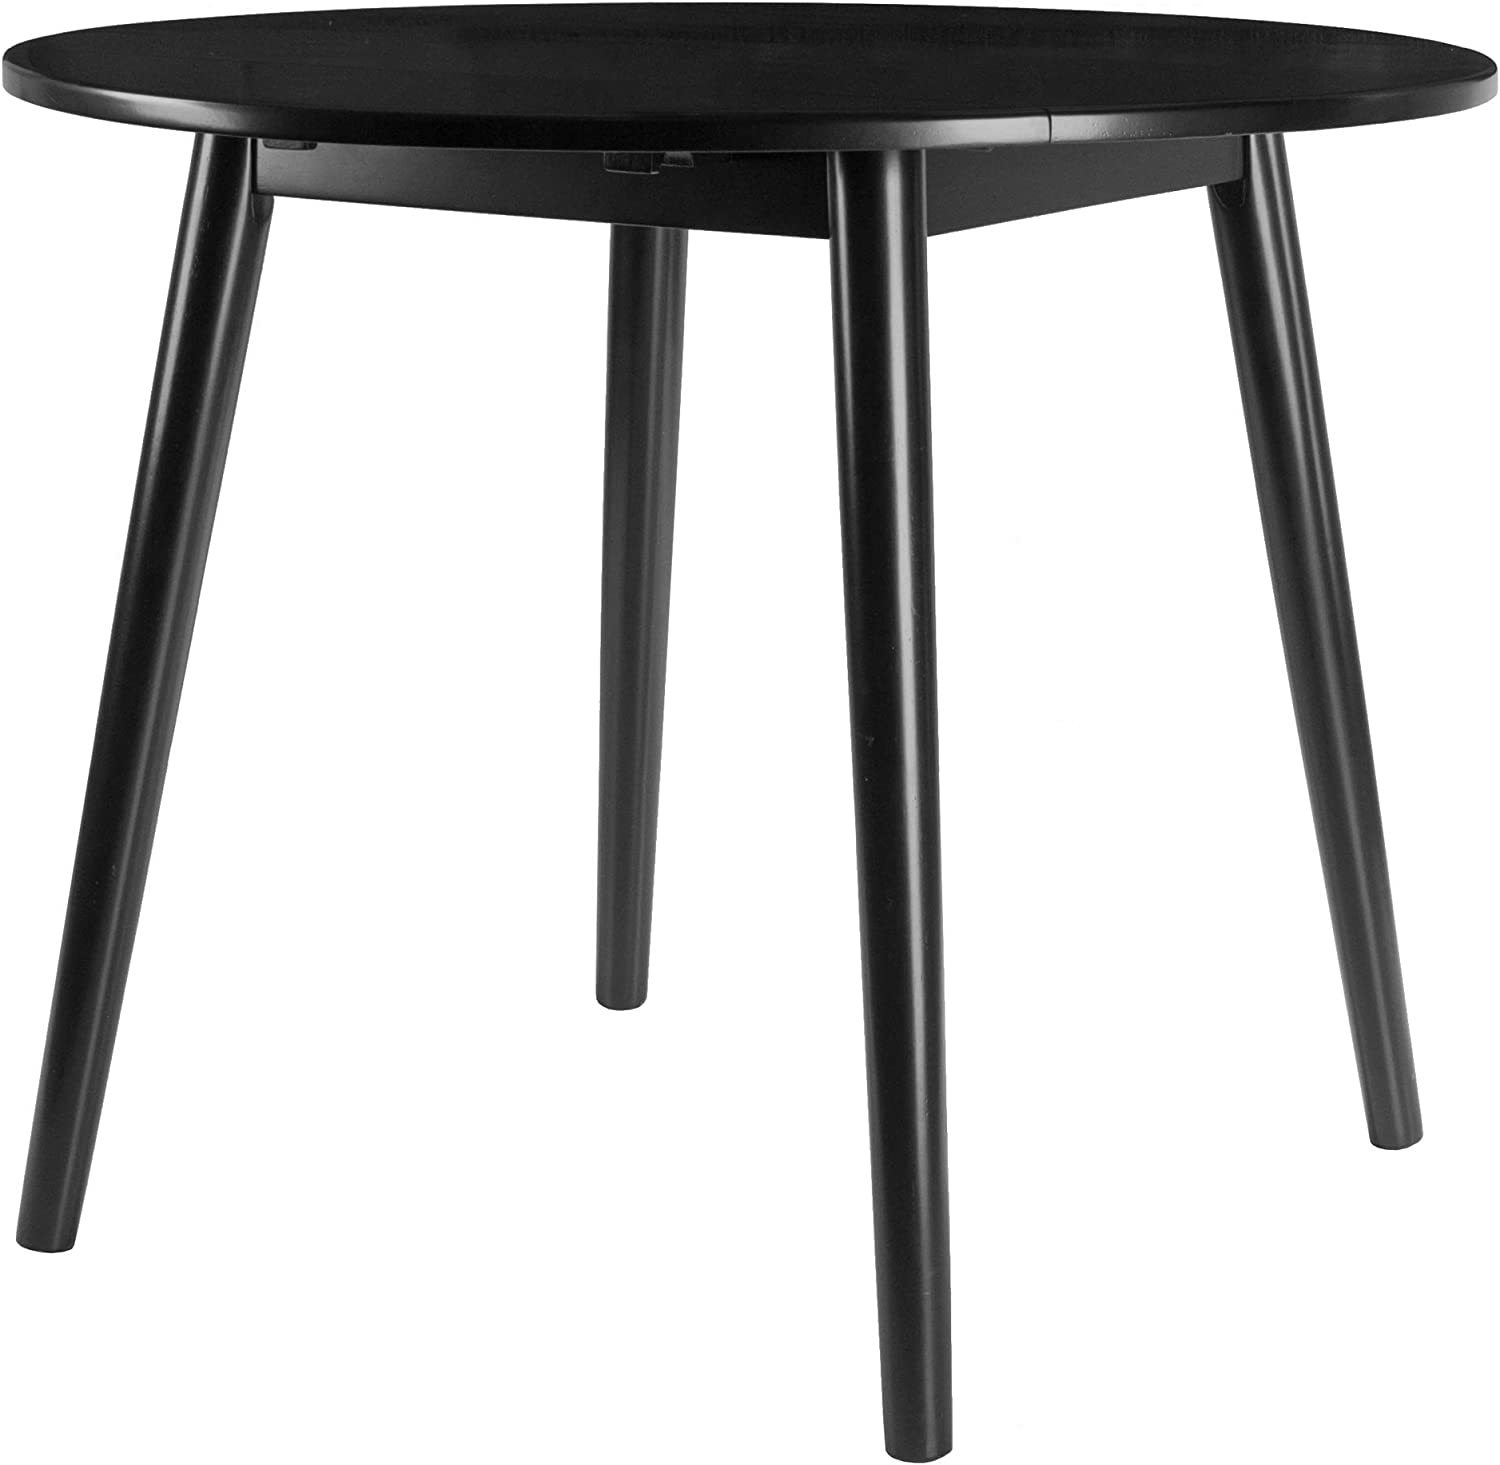 Winsome Moreno Dining Table, Black - $171.99